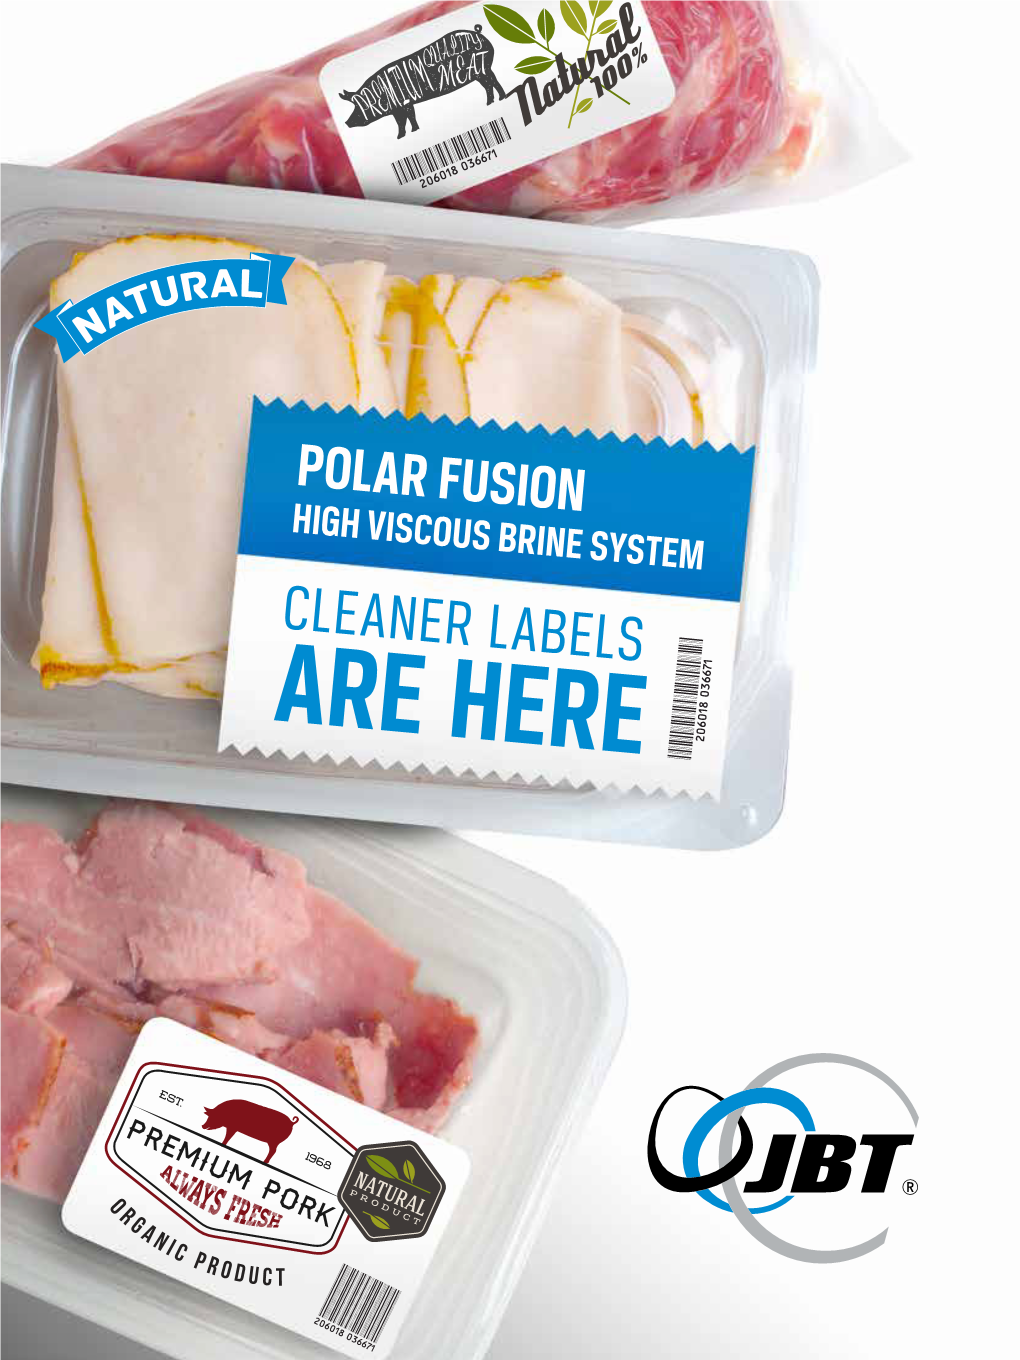 HIGH VISCOUS BRINE SYSTEM CLEANER LABELS ARE HERE Polar Fusion High Viscous Brine System